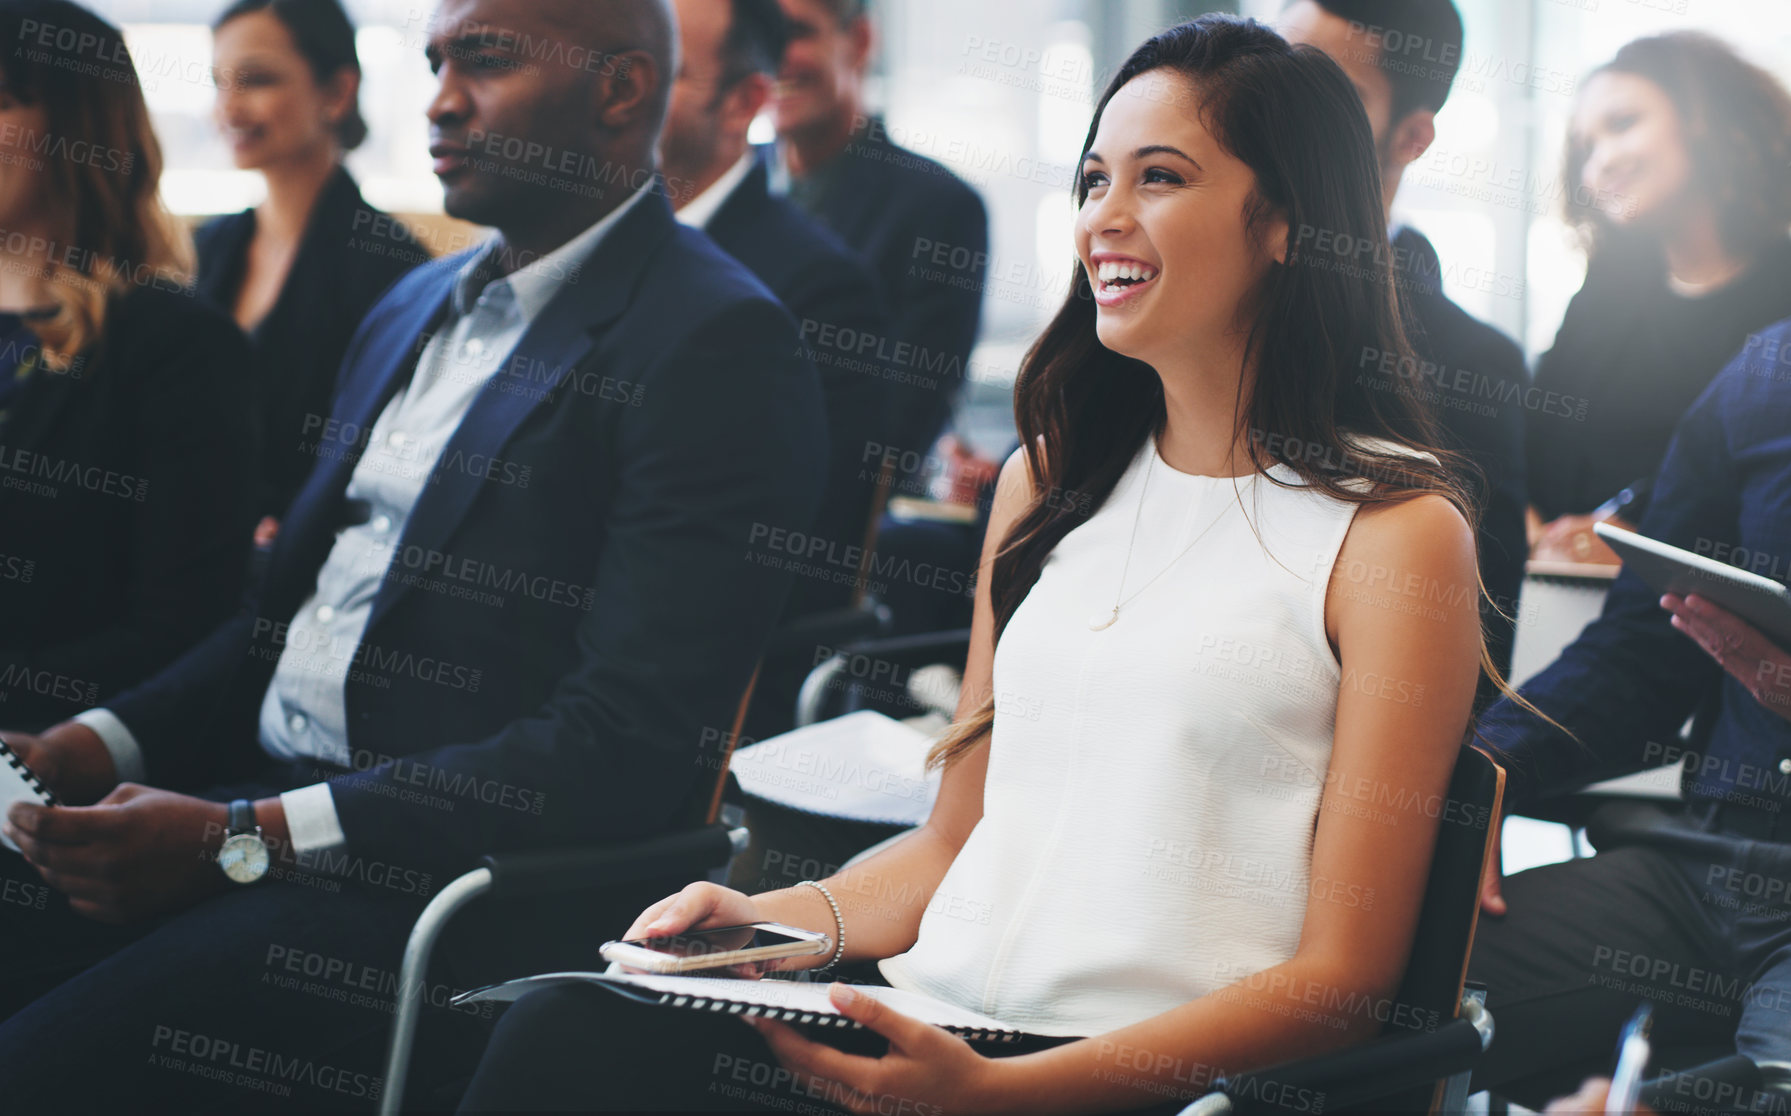 Buy stock photo Shot of a happy young businesswoman sitting in the audience of a business conference